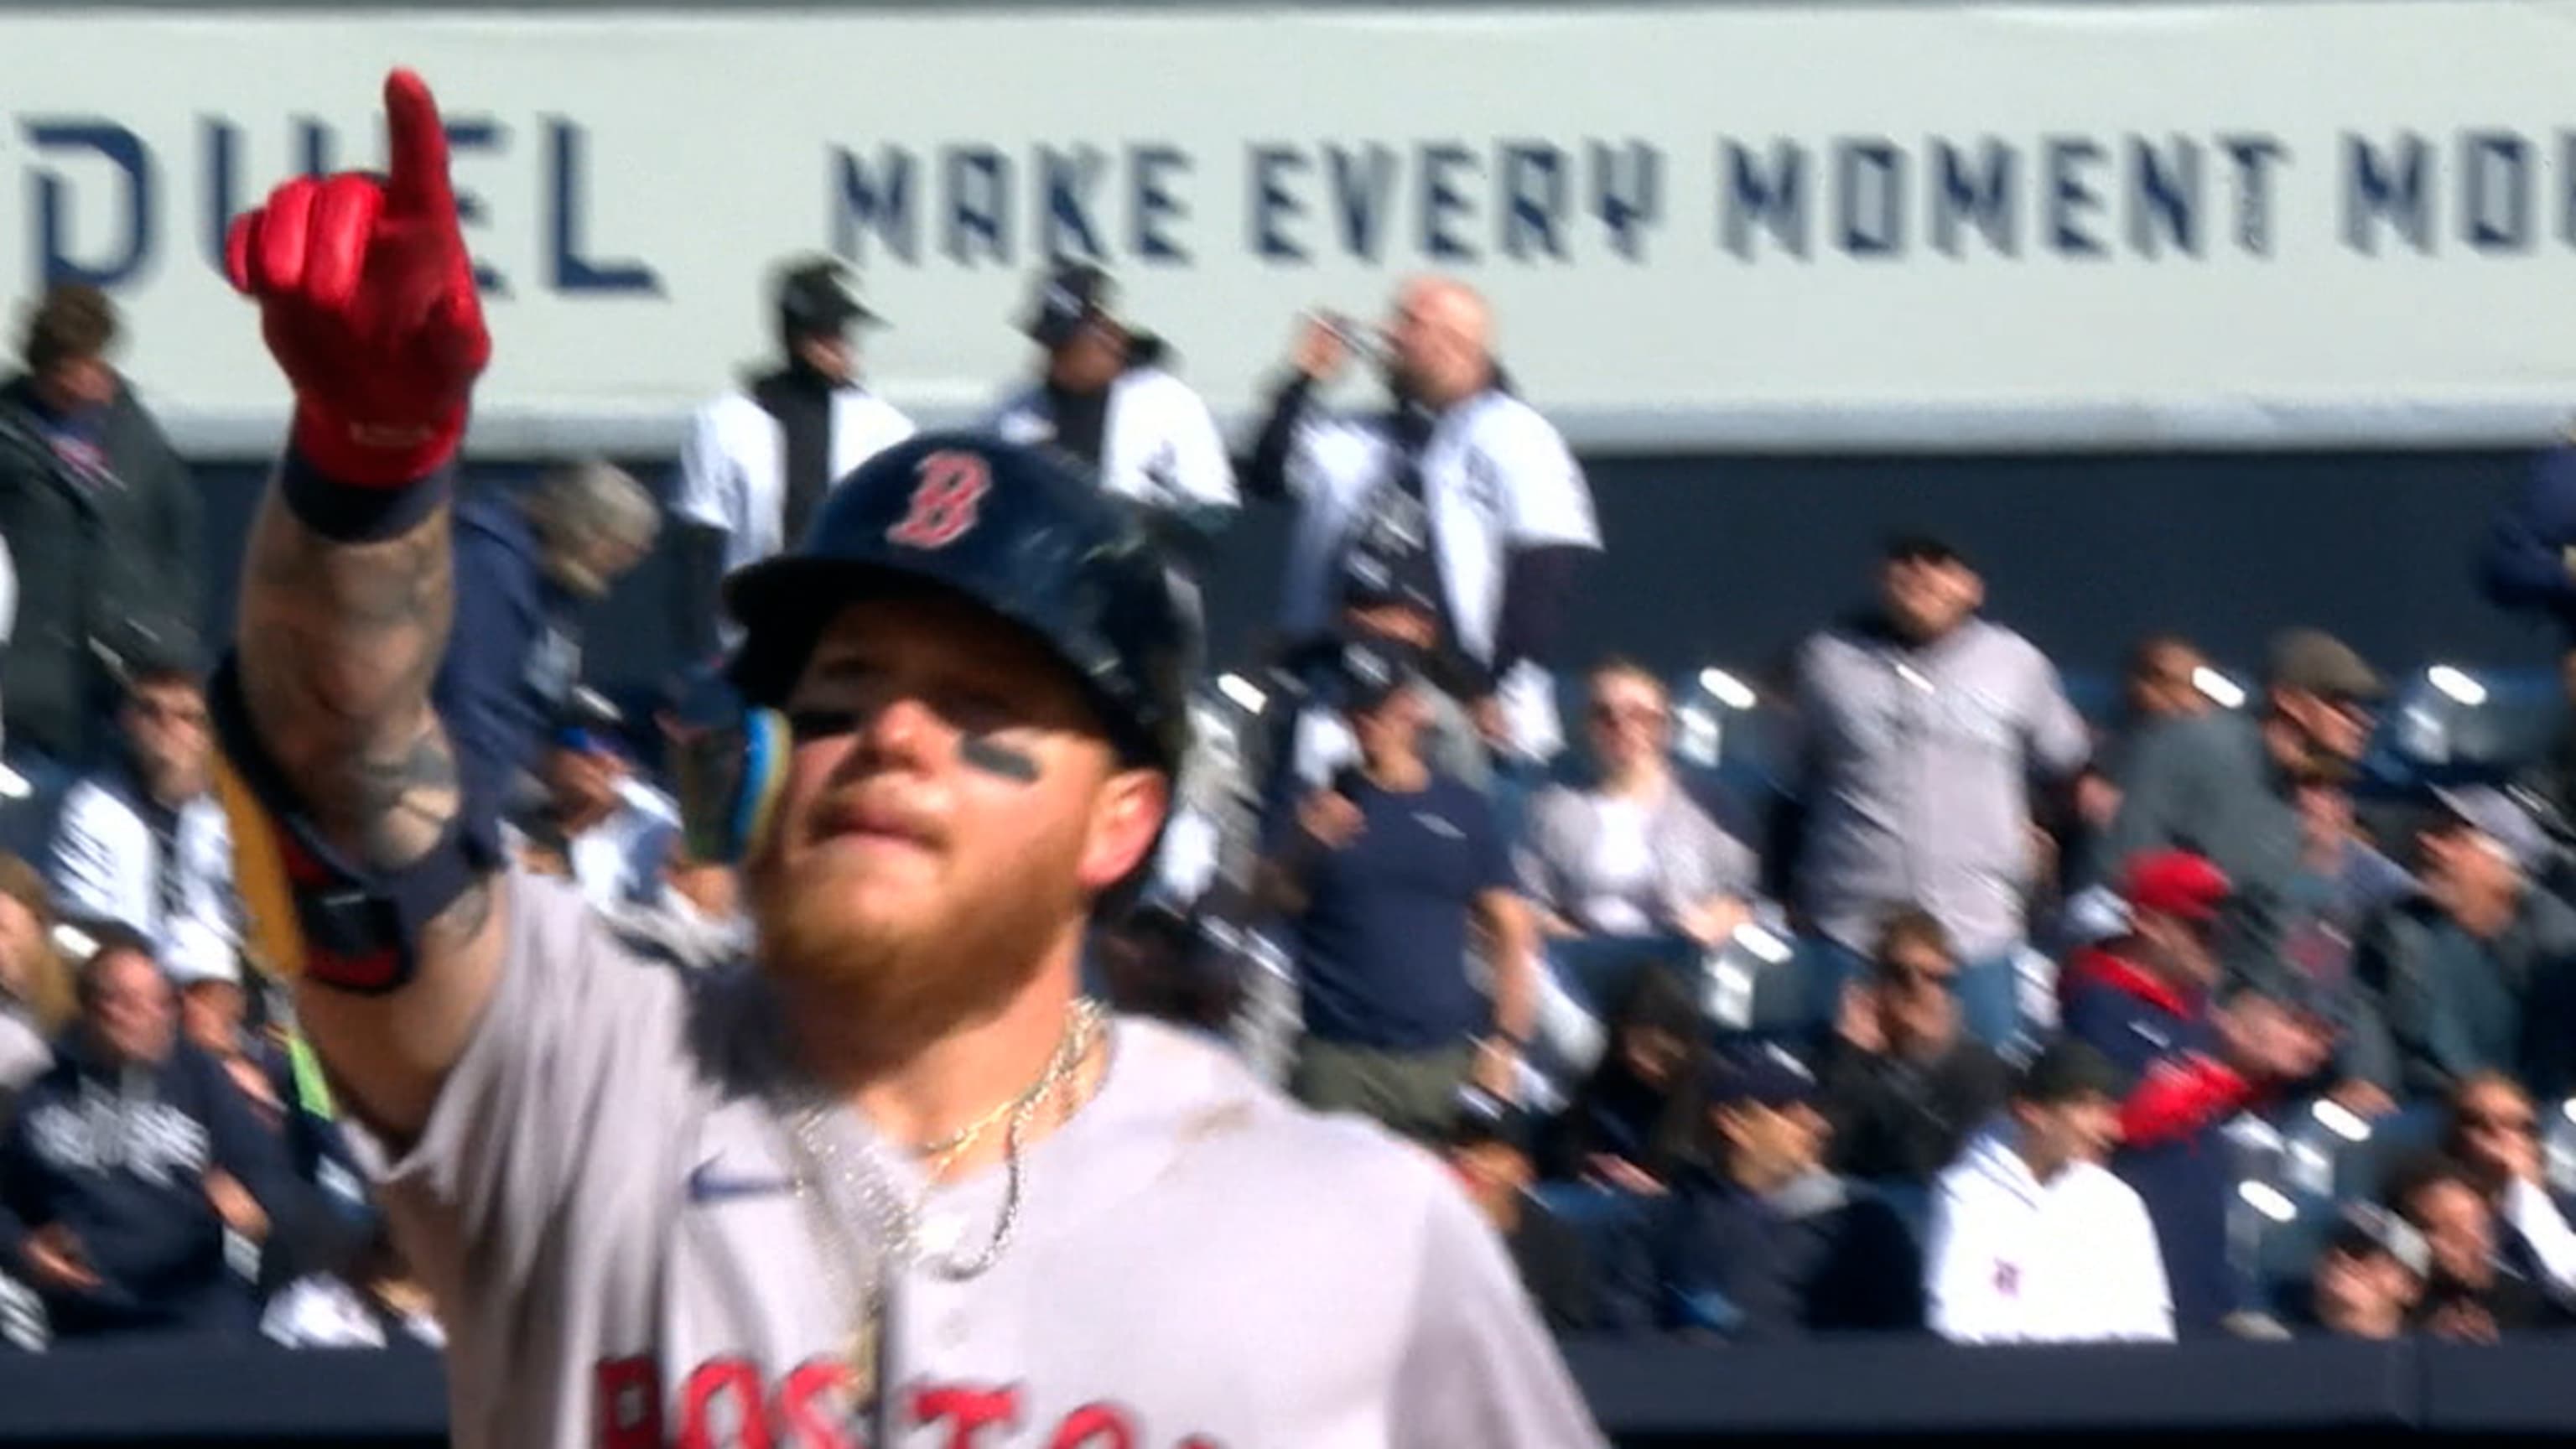 Alex Verdugo gives it to fans after HR in Bronx